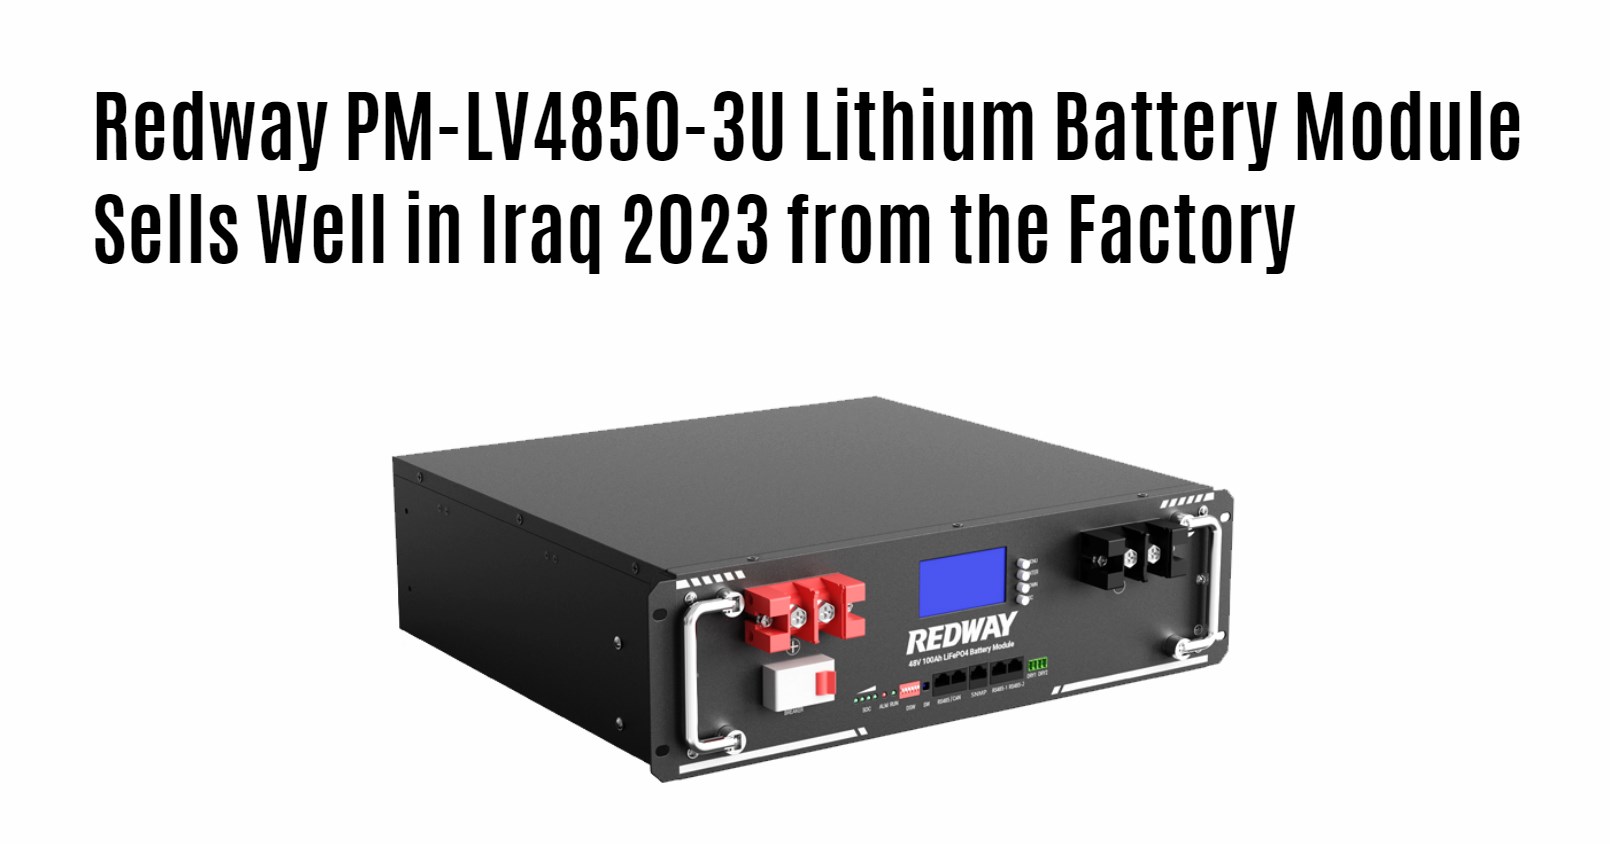 Redway PM-LV4850-3U Lithium Battery Module Sells Well in Iraq 2023 from the Factory. 48v 50ah server rack battery factory oem